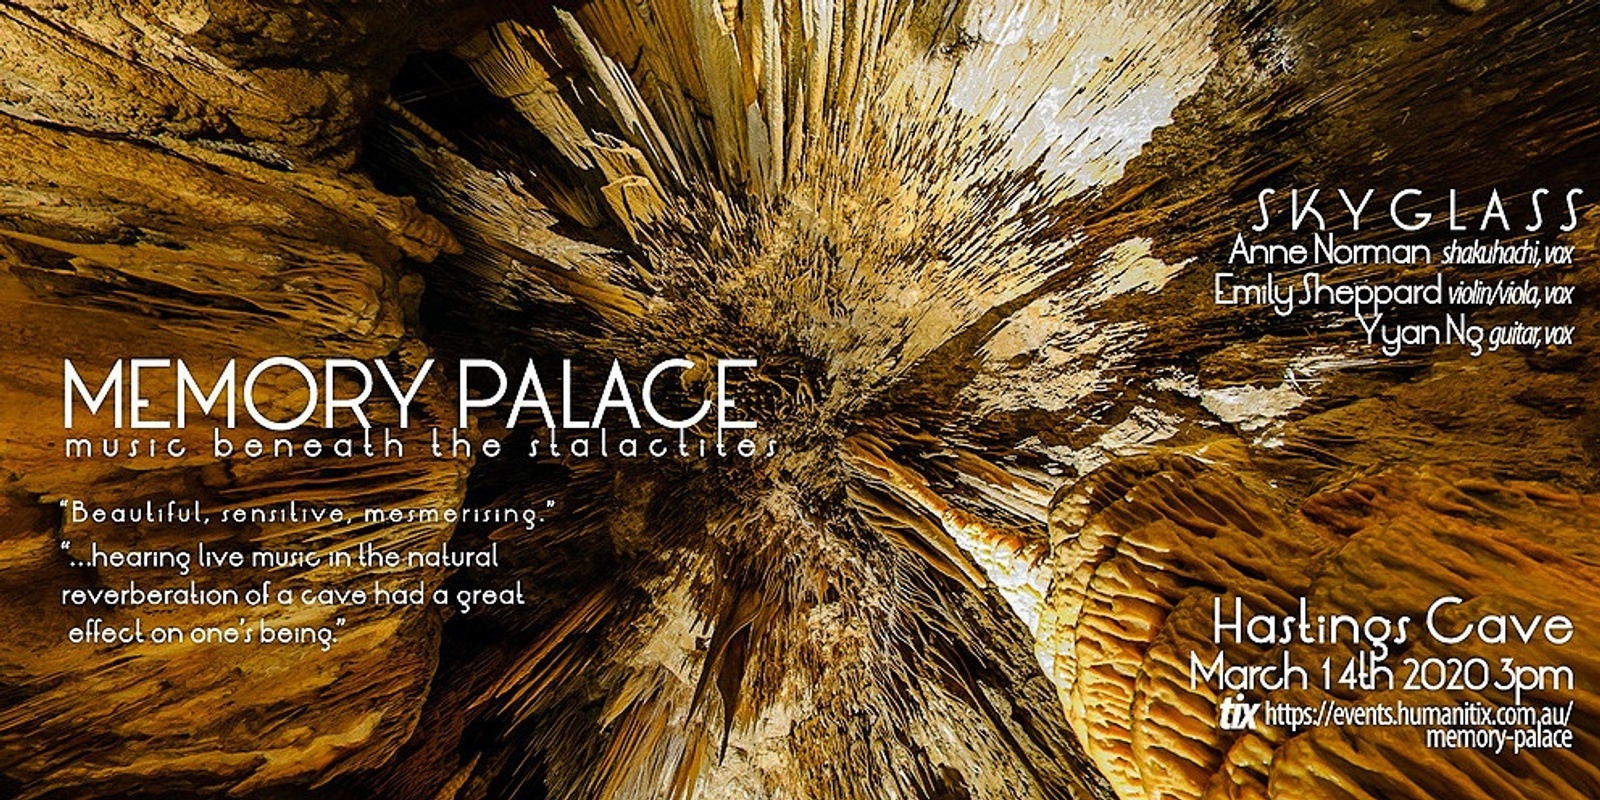 Banner image for Memory Palace at Hastings Cave